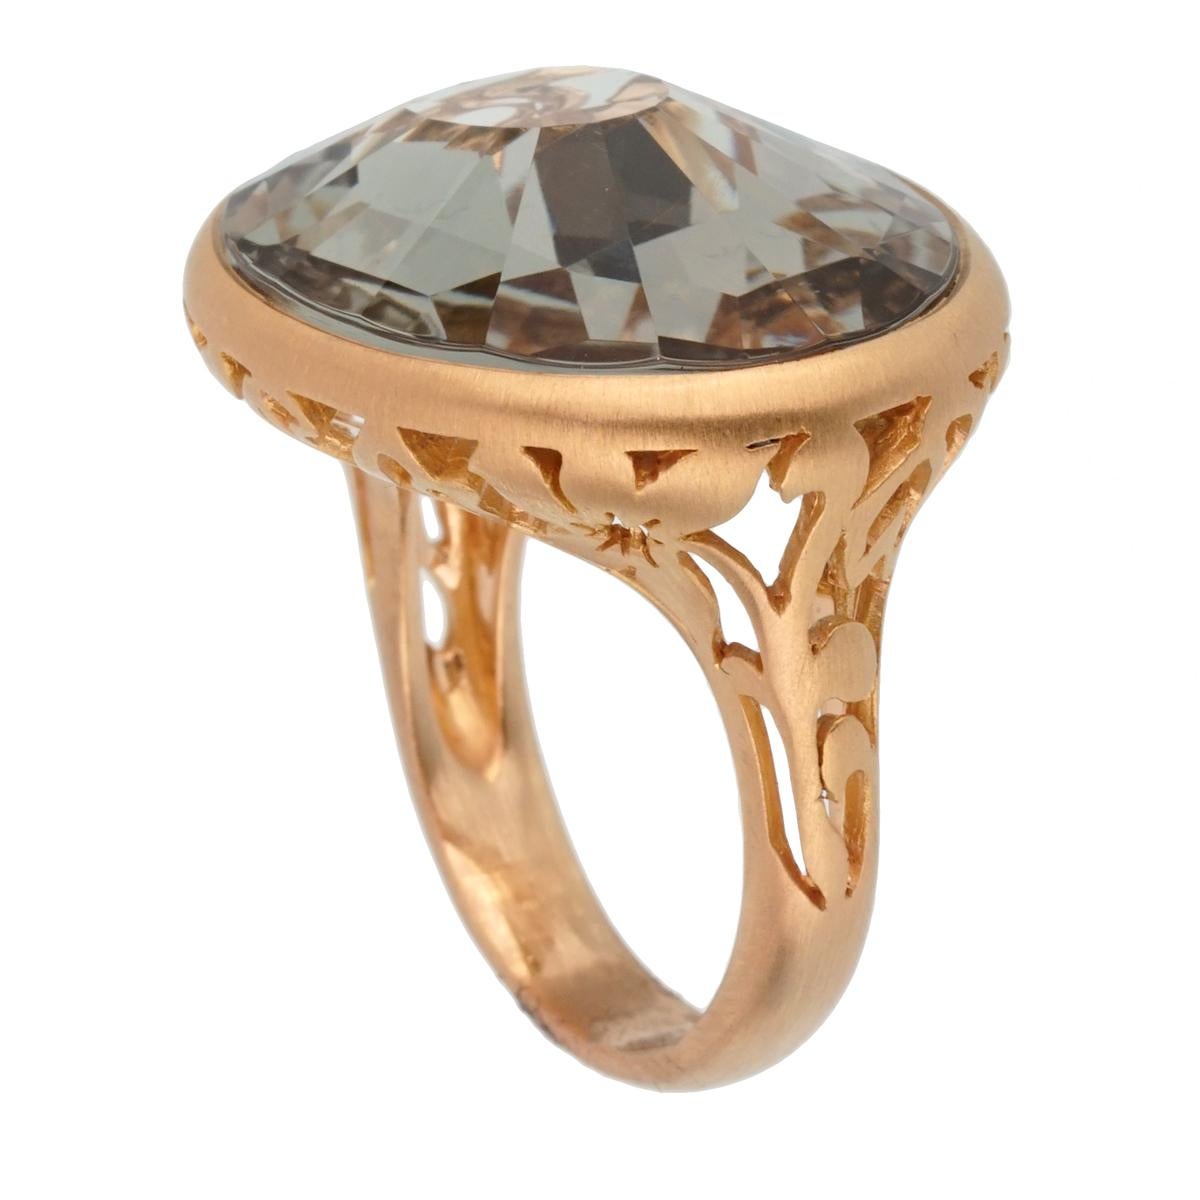 A chic brand new Pomellato cocktail ring showcasing a 10.19ct Green Prasiolite set in 18k rose gold. The ring measures a size 6.5 and can be resized

Pomellato Retail: $5500
Sku: 2441